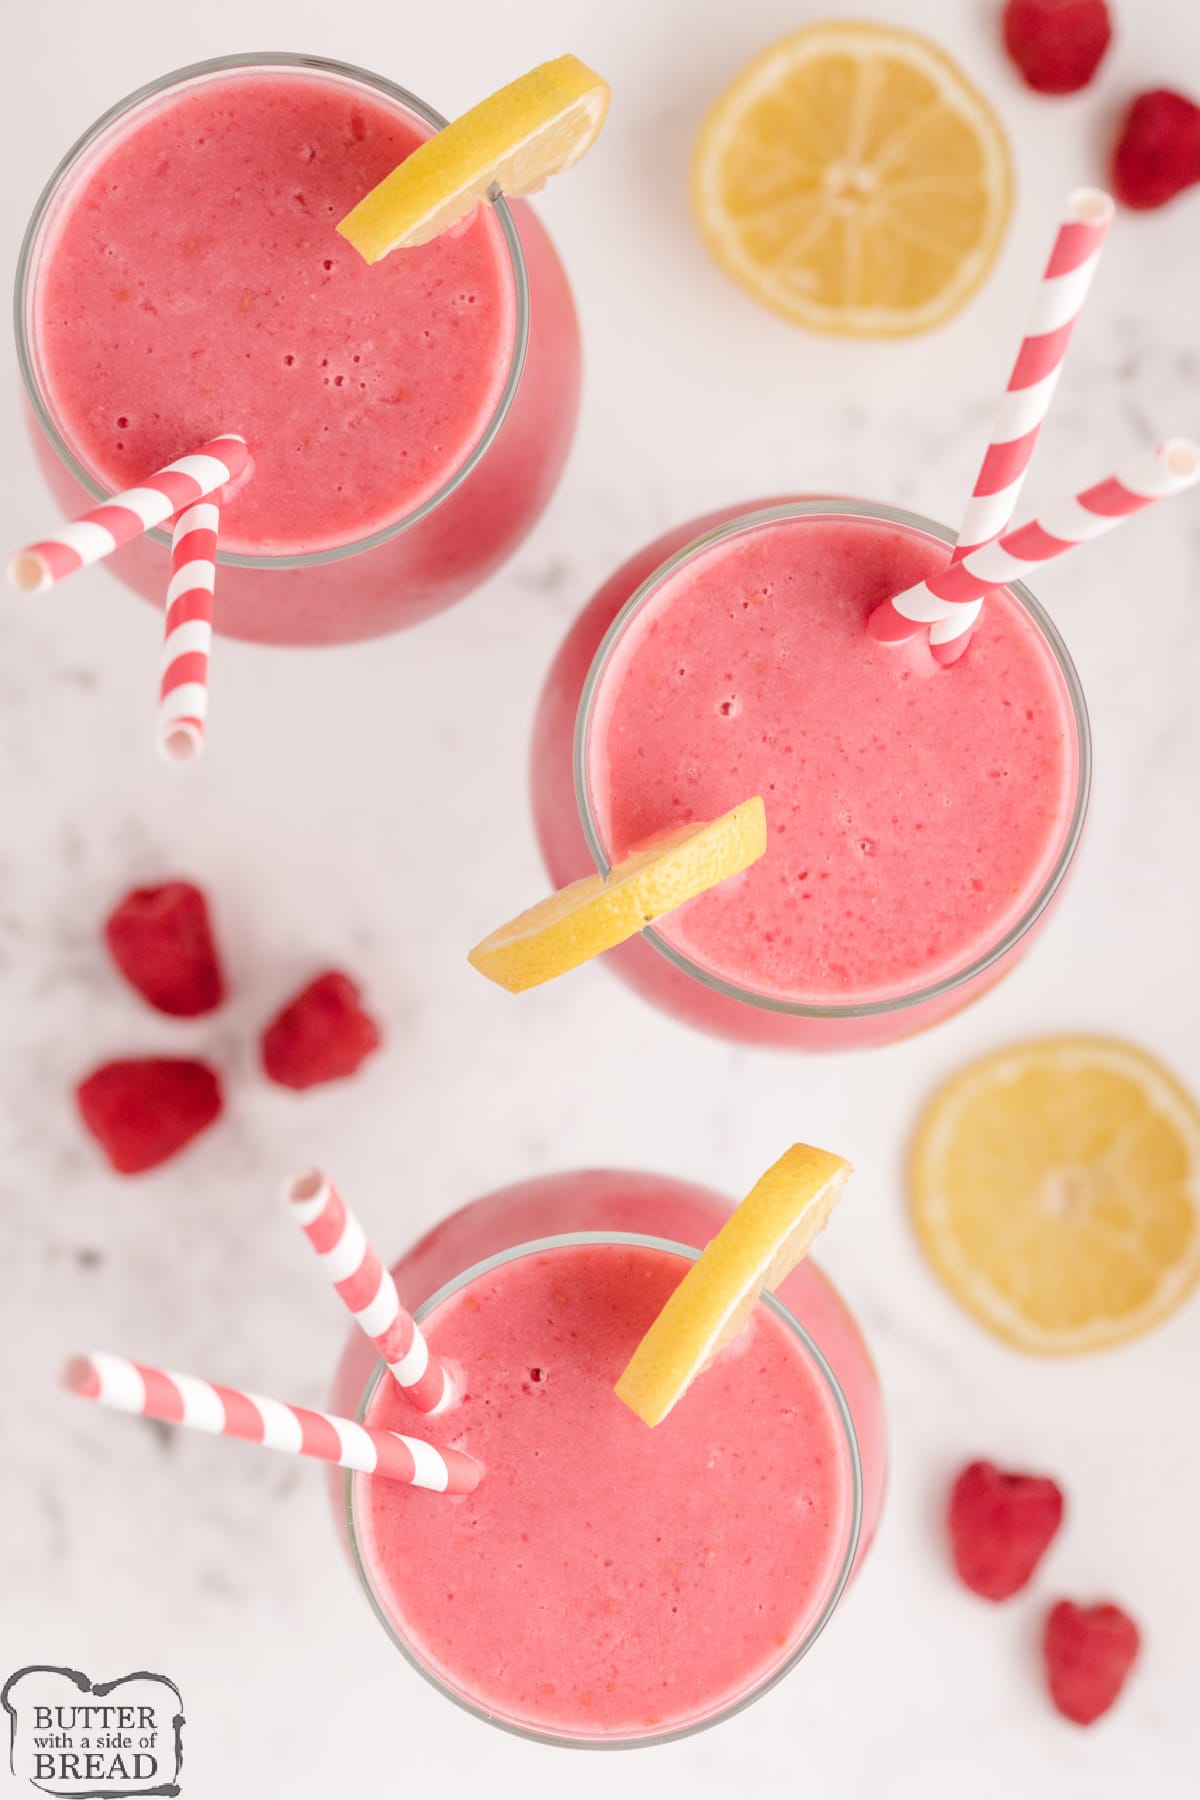 Smoothies made with lemonade and raspberries